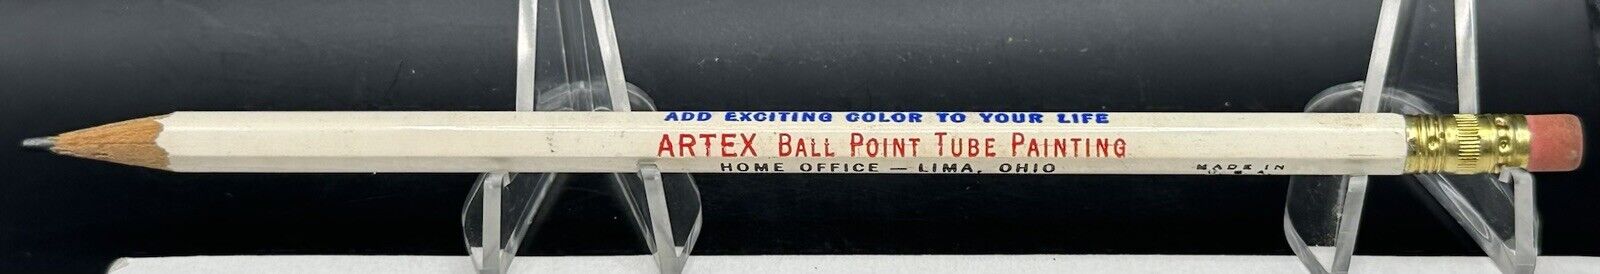 Artex Ball Point Tube Painting Pencil Lima Ohio Add Exciting Color To Your Life